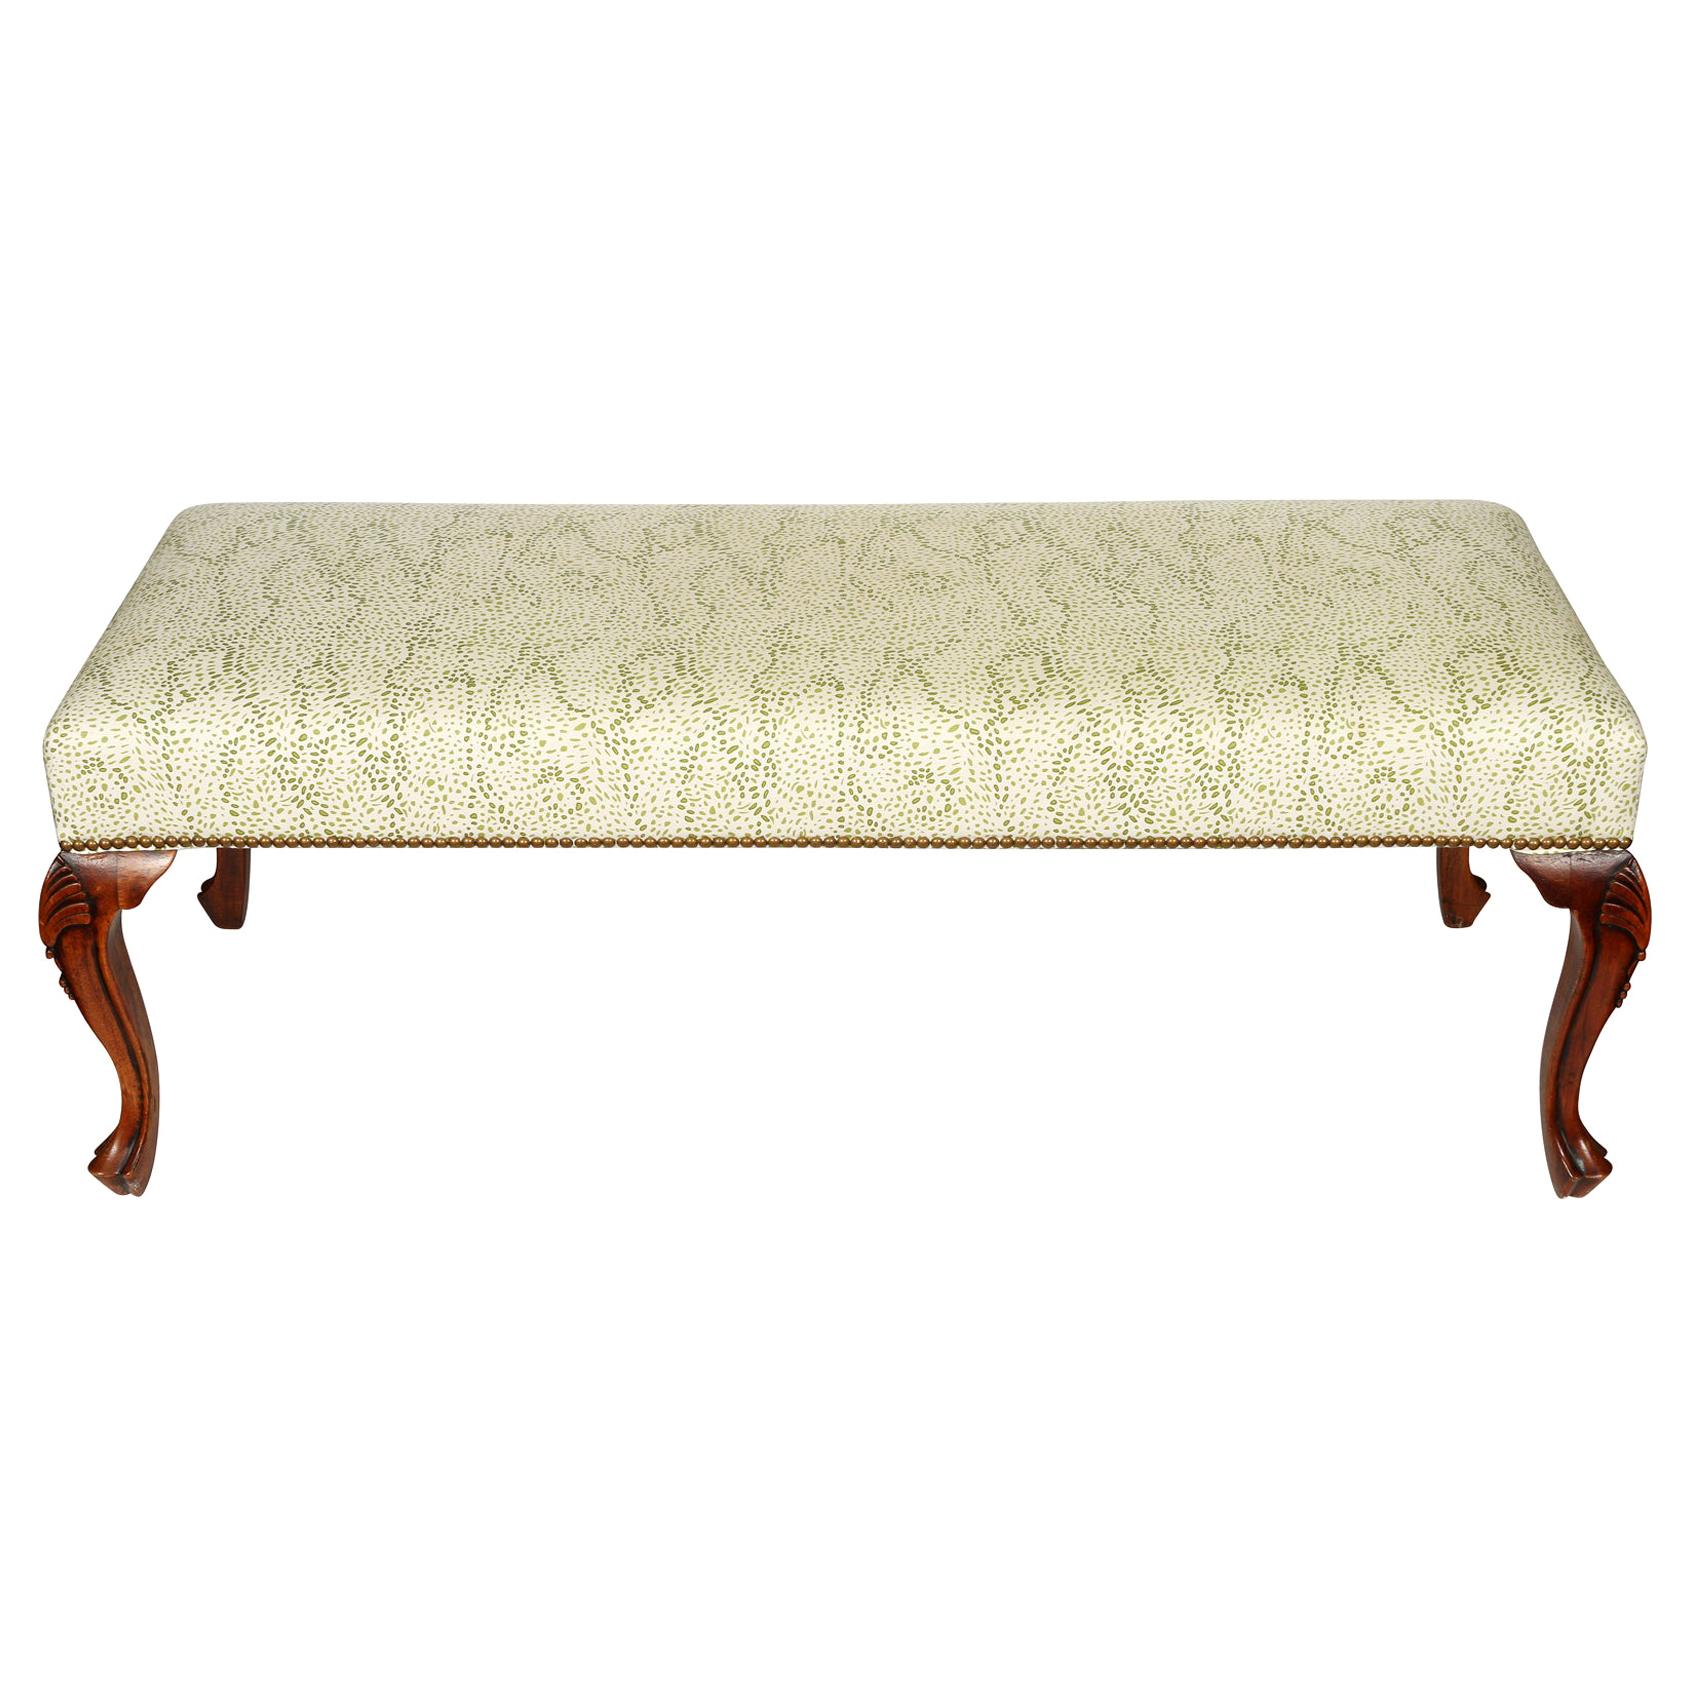 French Upholstered Bench with Cabriole Legs in Meg Braff Designs Menton Fabric For Sale